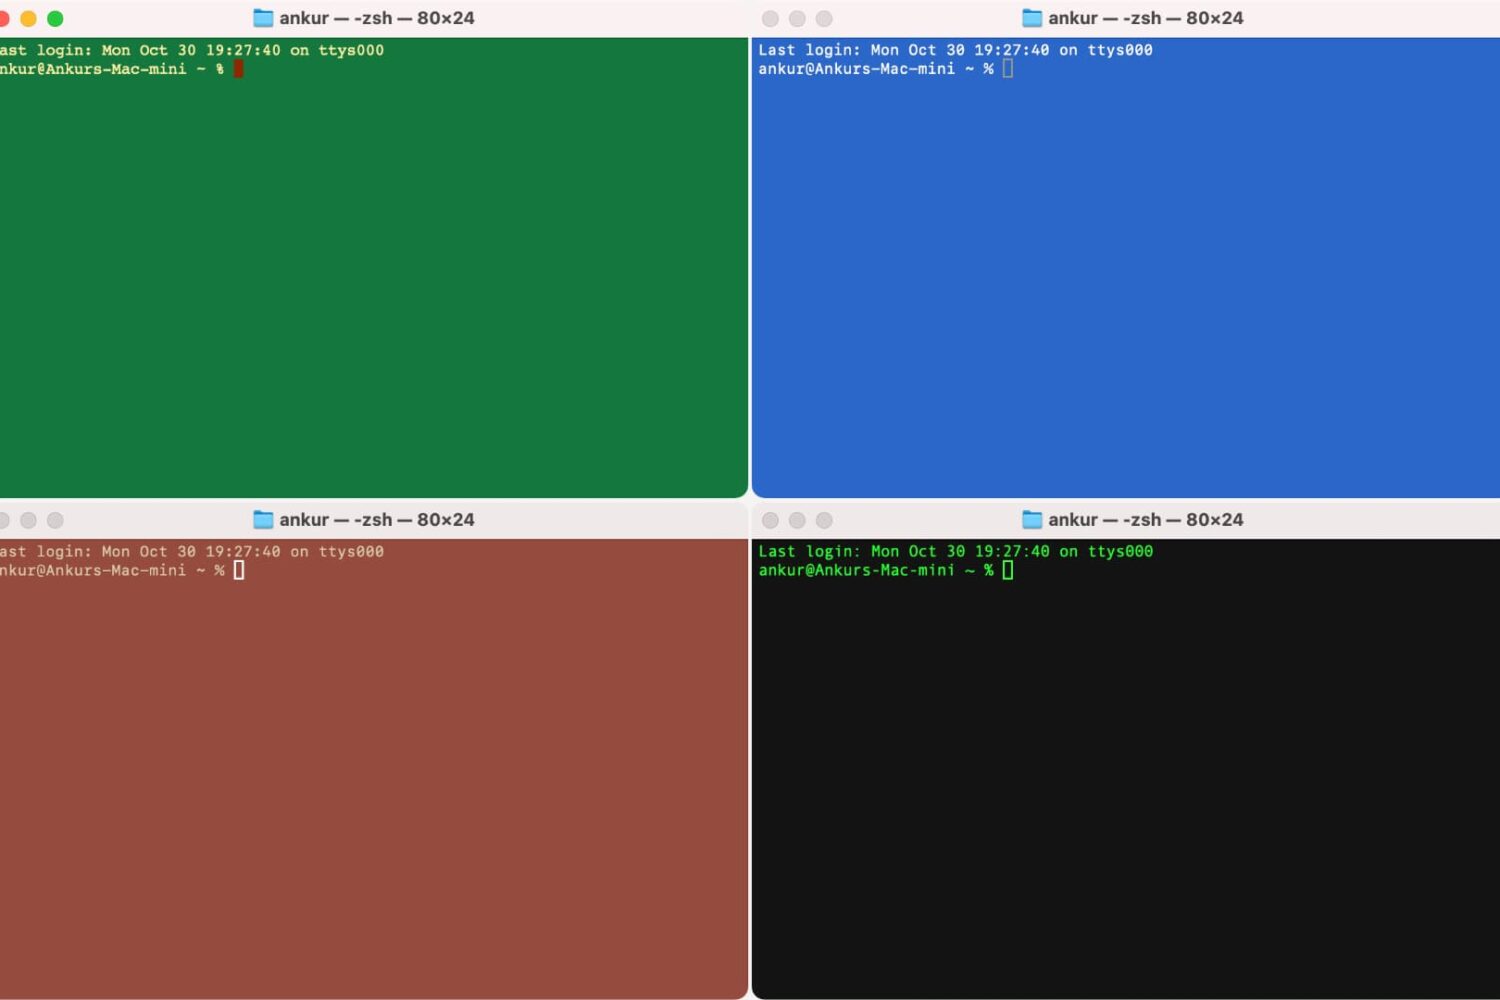 Terminal window in four different colors